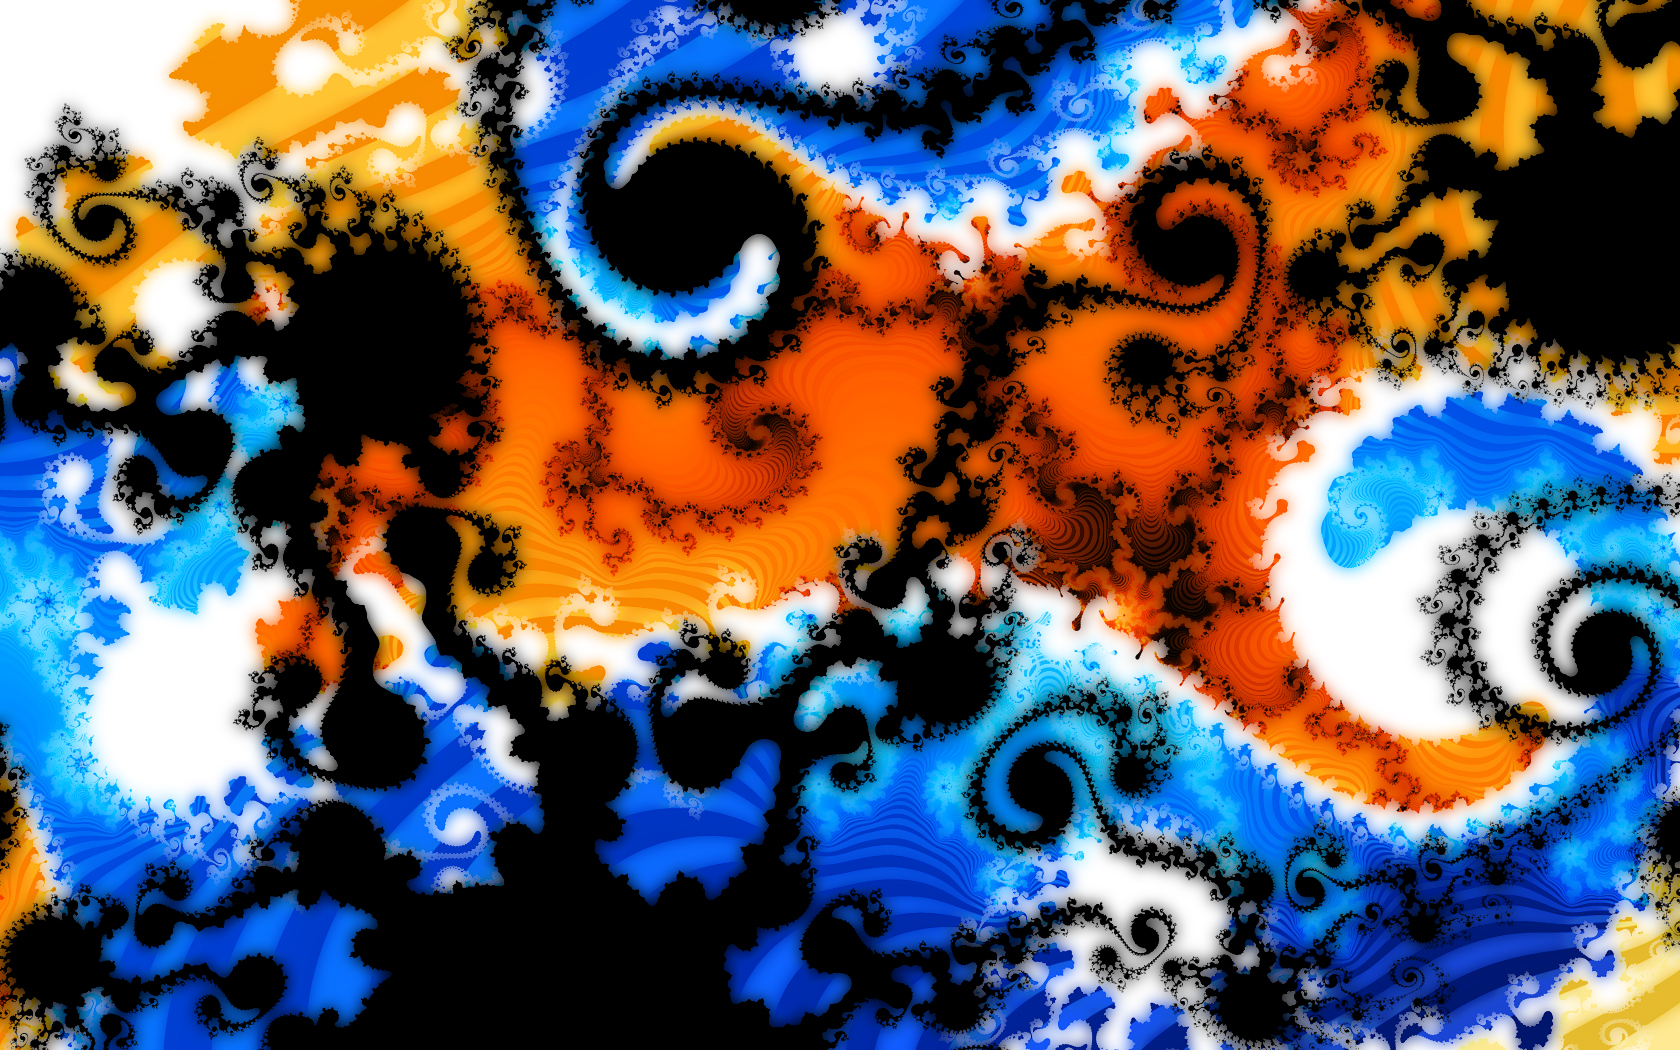 Vibrant abstract pattern blending blue and orange colors.